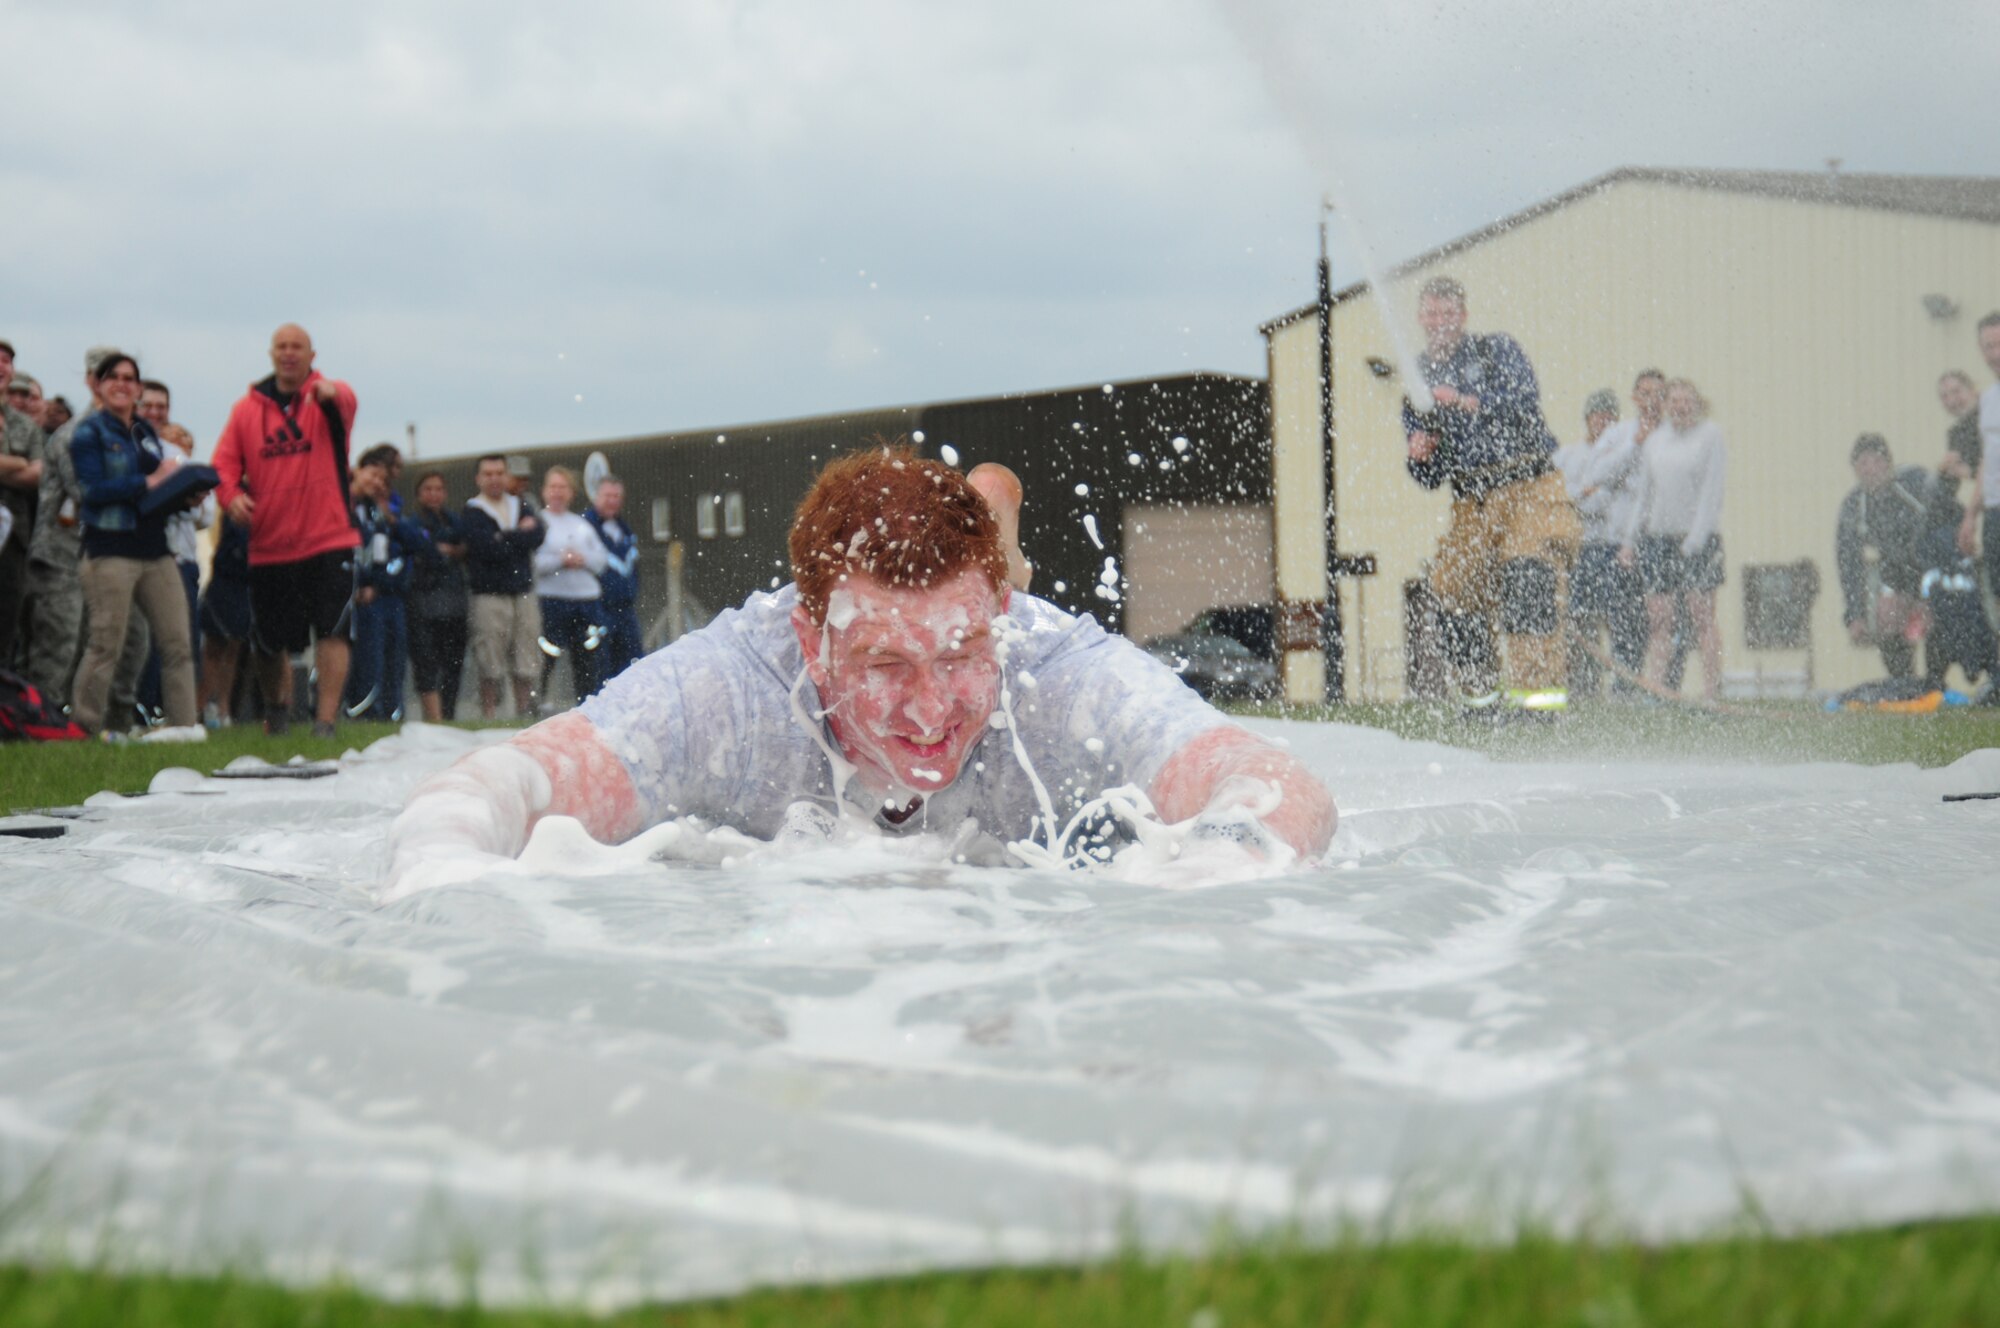 Staff Sgt. Jonathon Williams, 100th Security Forces Squadron trainer, gets a face-full of foam as he glides along the “slip-n-slide” May 10, 2013, at a post Unit Effectiveness Inspection celebration on RAF Mildenhall, England. Airmen had the opportunity to relax and compete against other squadrons in morale-boosting sports challenges after a Unit Effectiveness Inspection. (U.S. Air Force photo by Karen Abeyasekere/Released)